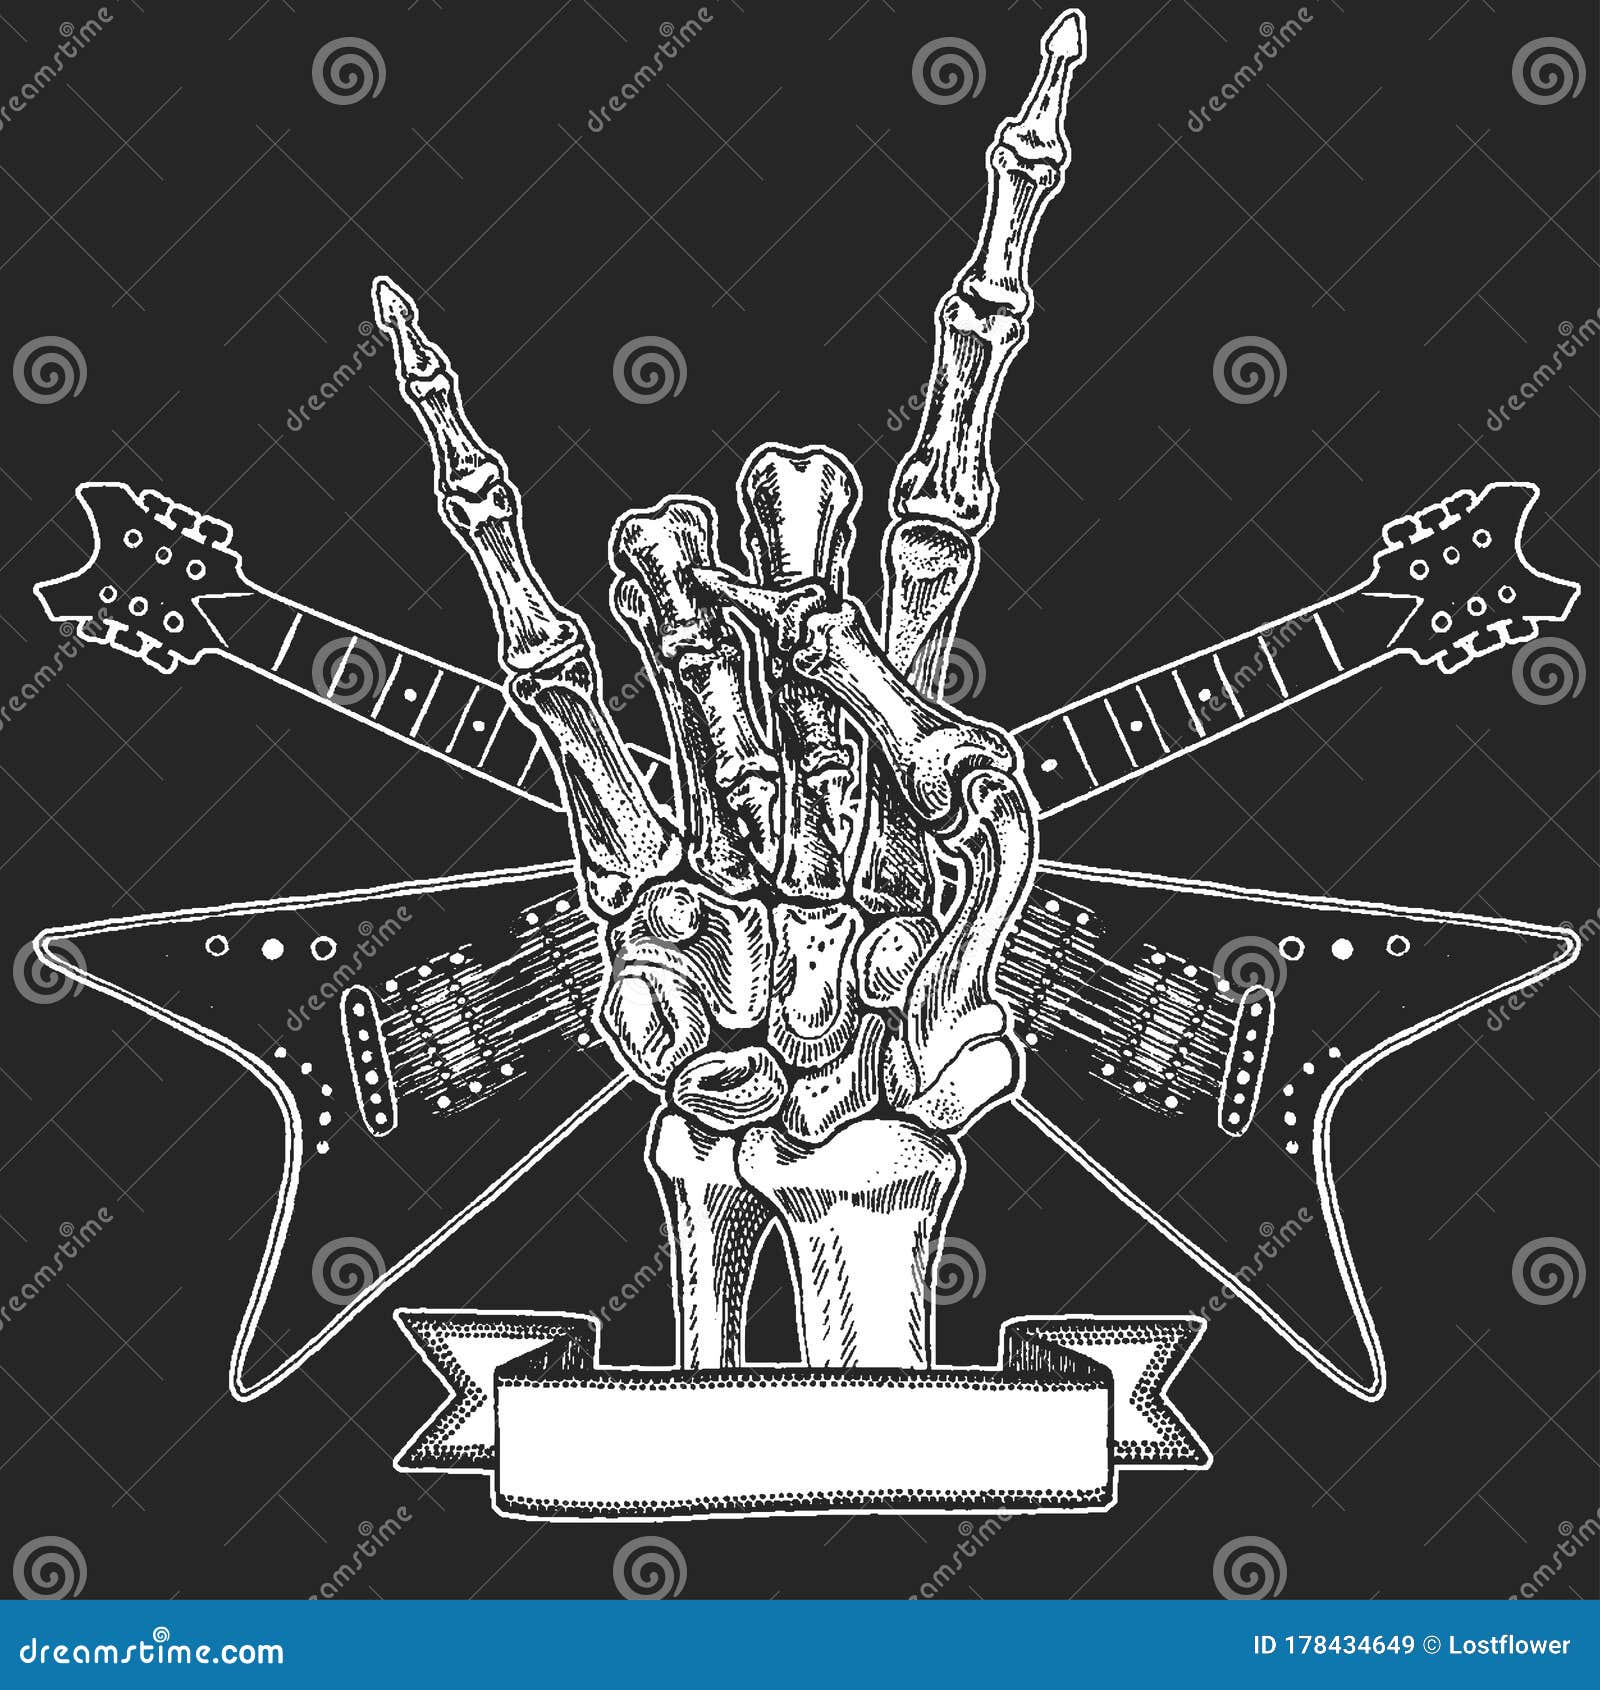 Heavy Metal Music Vector Images (over 7,300)